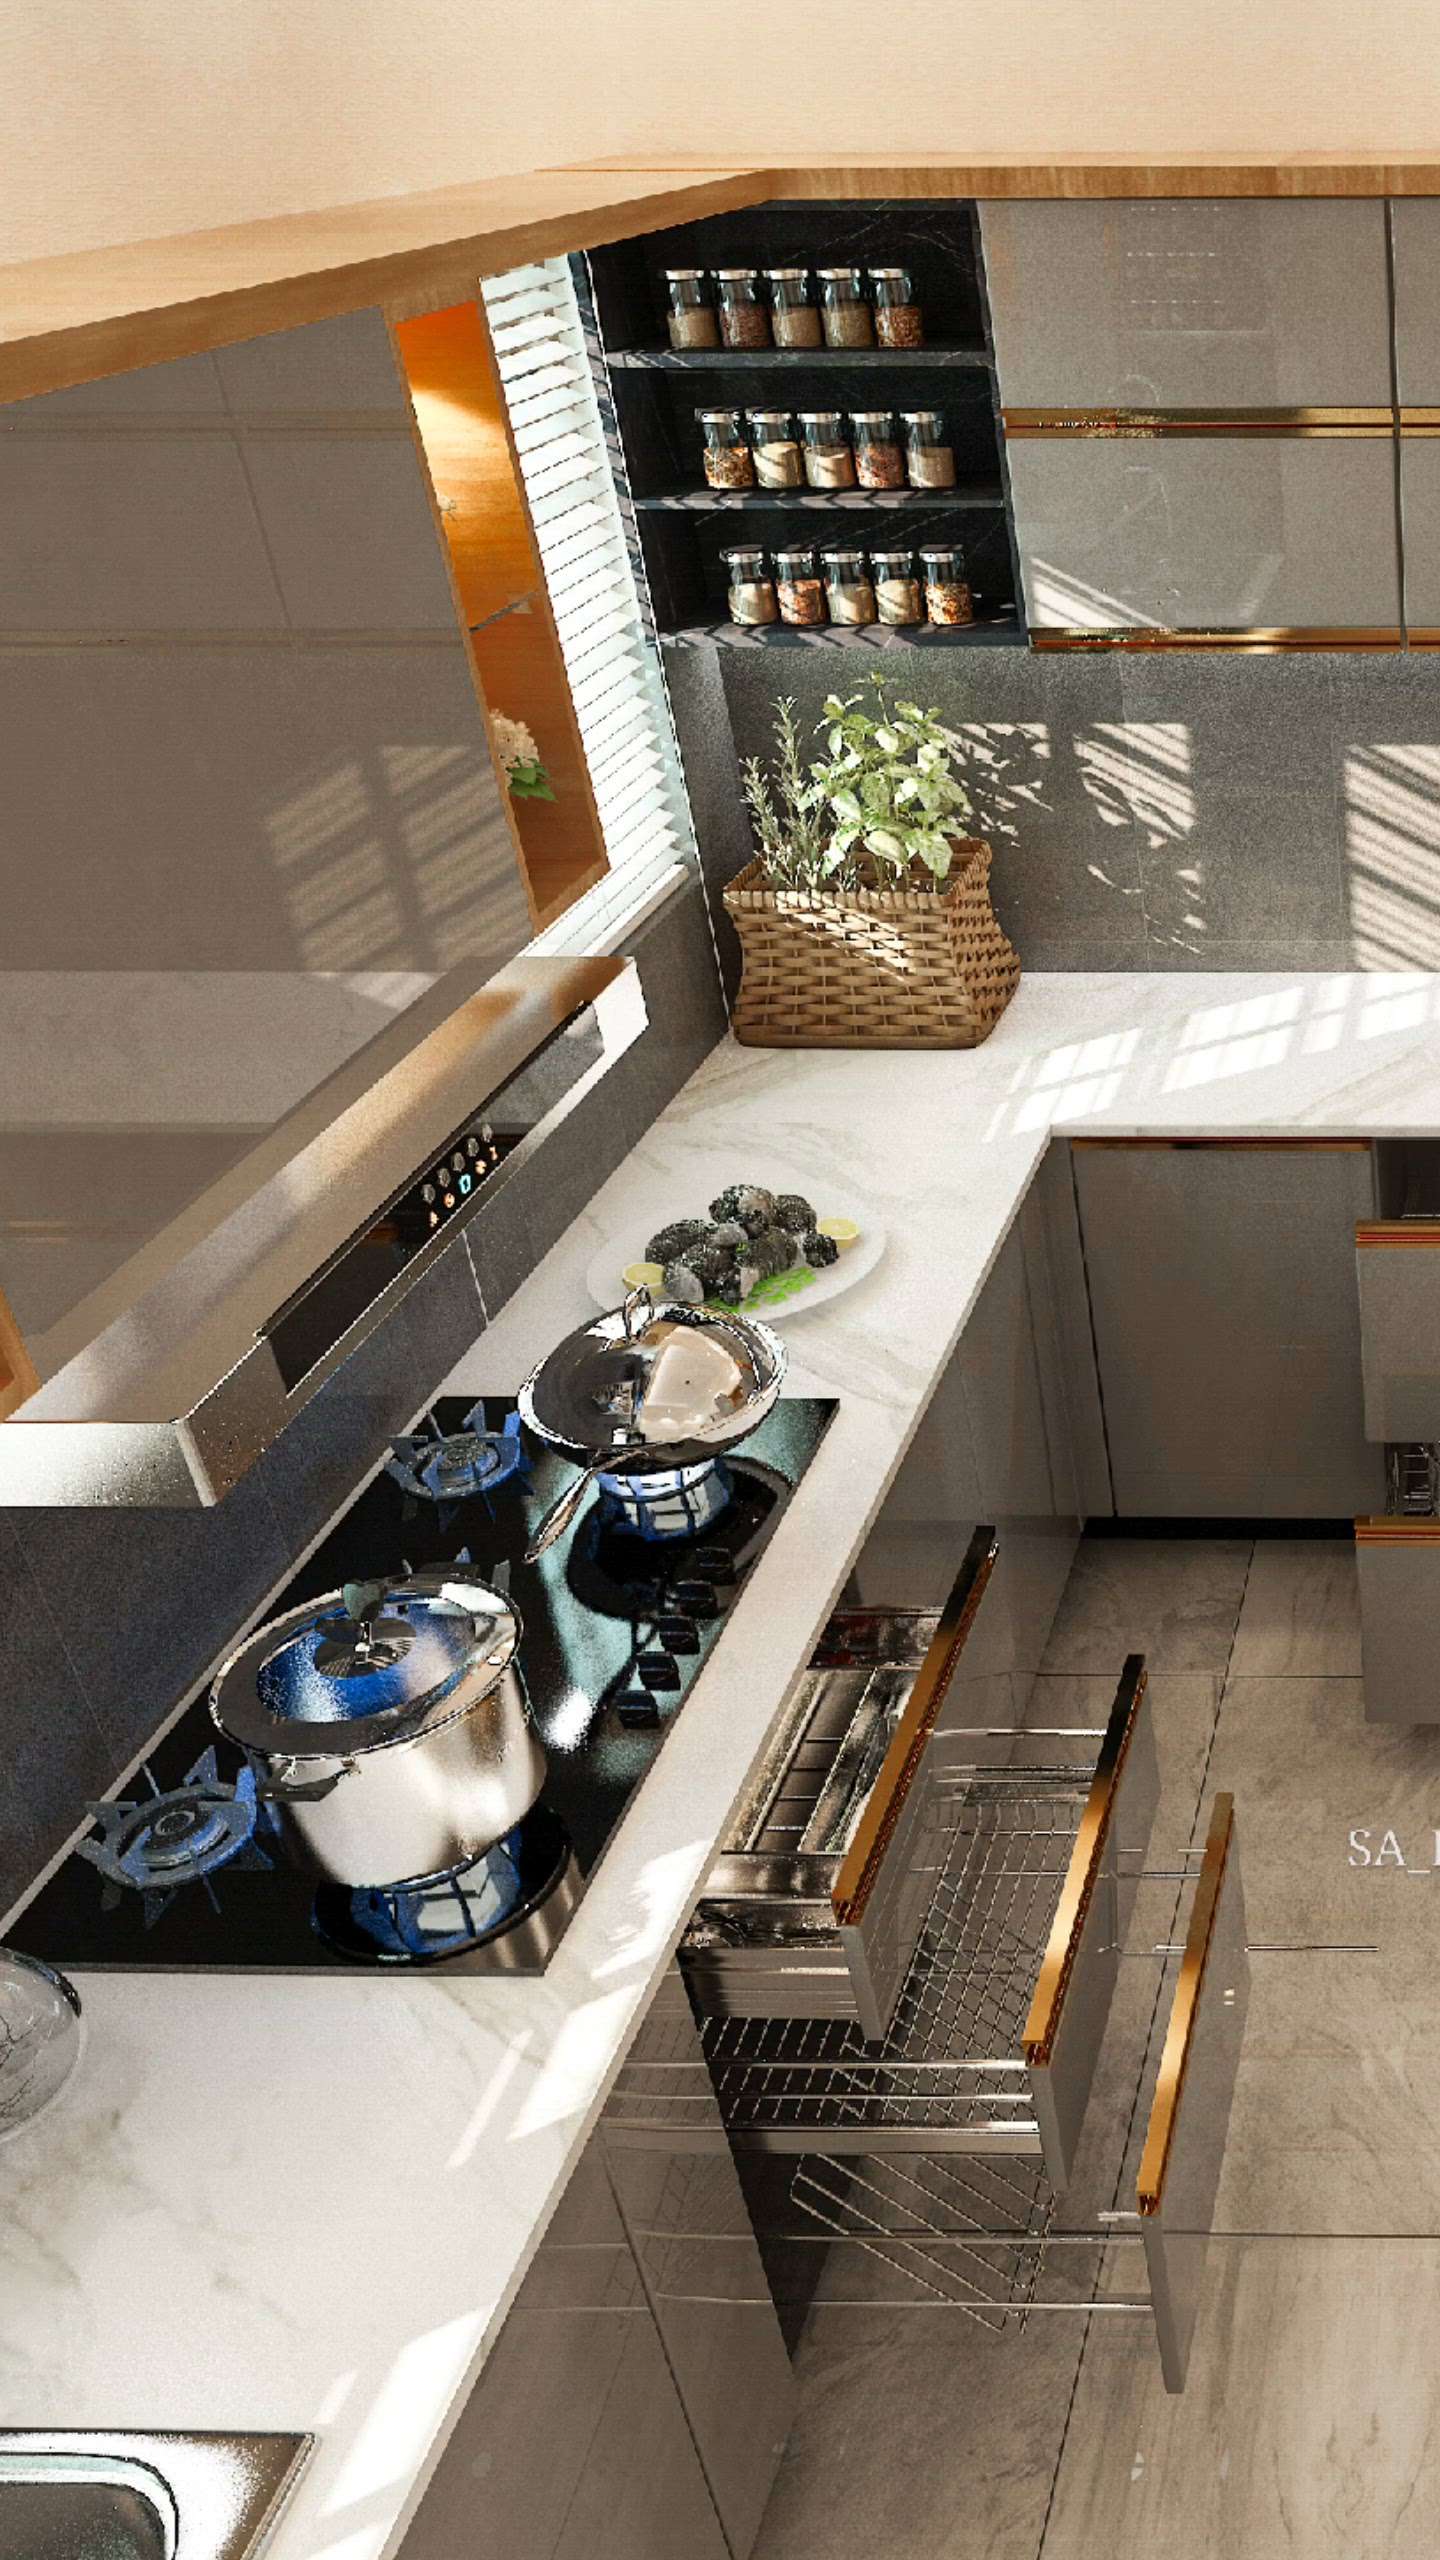 Modular Kitchen
3 views 1800rs  . specifications} 
Material Using: 710 BWP Marine Plywood 16mm (Wuudply
premium) & 16mm Multiwood
Laminates Using: Acrylic Glass Laminates by Euro Pratik & GreenLam
Hinges & Slider using EBCO
GTPTDT
Cutlery Tray
Basket Cup & Saucer Basket
Bottle Pullout
Tall Unit or Ladder Unit
Plain Basket
Plate Basket
Side Corner Pullout
Dustbin
 Hood & Hob
Glass Shutter For GTPT & G Profile Handle
Modular Home Interior Designs.
710 BWP  Marine Plywood
500+ Louvers Charcoal Panel designs.
Customised Requirements.
Branded accessories & Material.
100% Machine Made Units.
Factory Manufacturing.
15 Years Warranty.
Quality Work & Best Finishing. For more Details Contact me

 #ClosedKitchen  #KitchenIdeas  #LargeKitchen  #KidsRoom  #marine  #ModularKitchen  #moderndesign  #modernhouse  #LargeKitchen  #WoodenKitchen  #3d  #render3d3d  #3DoorWardrobe